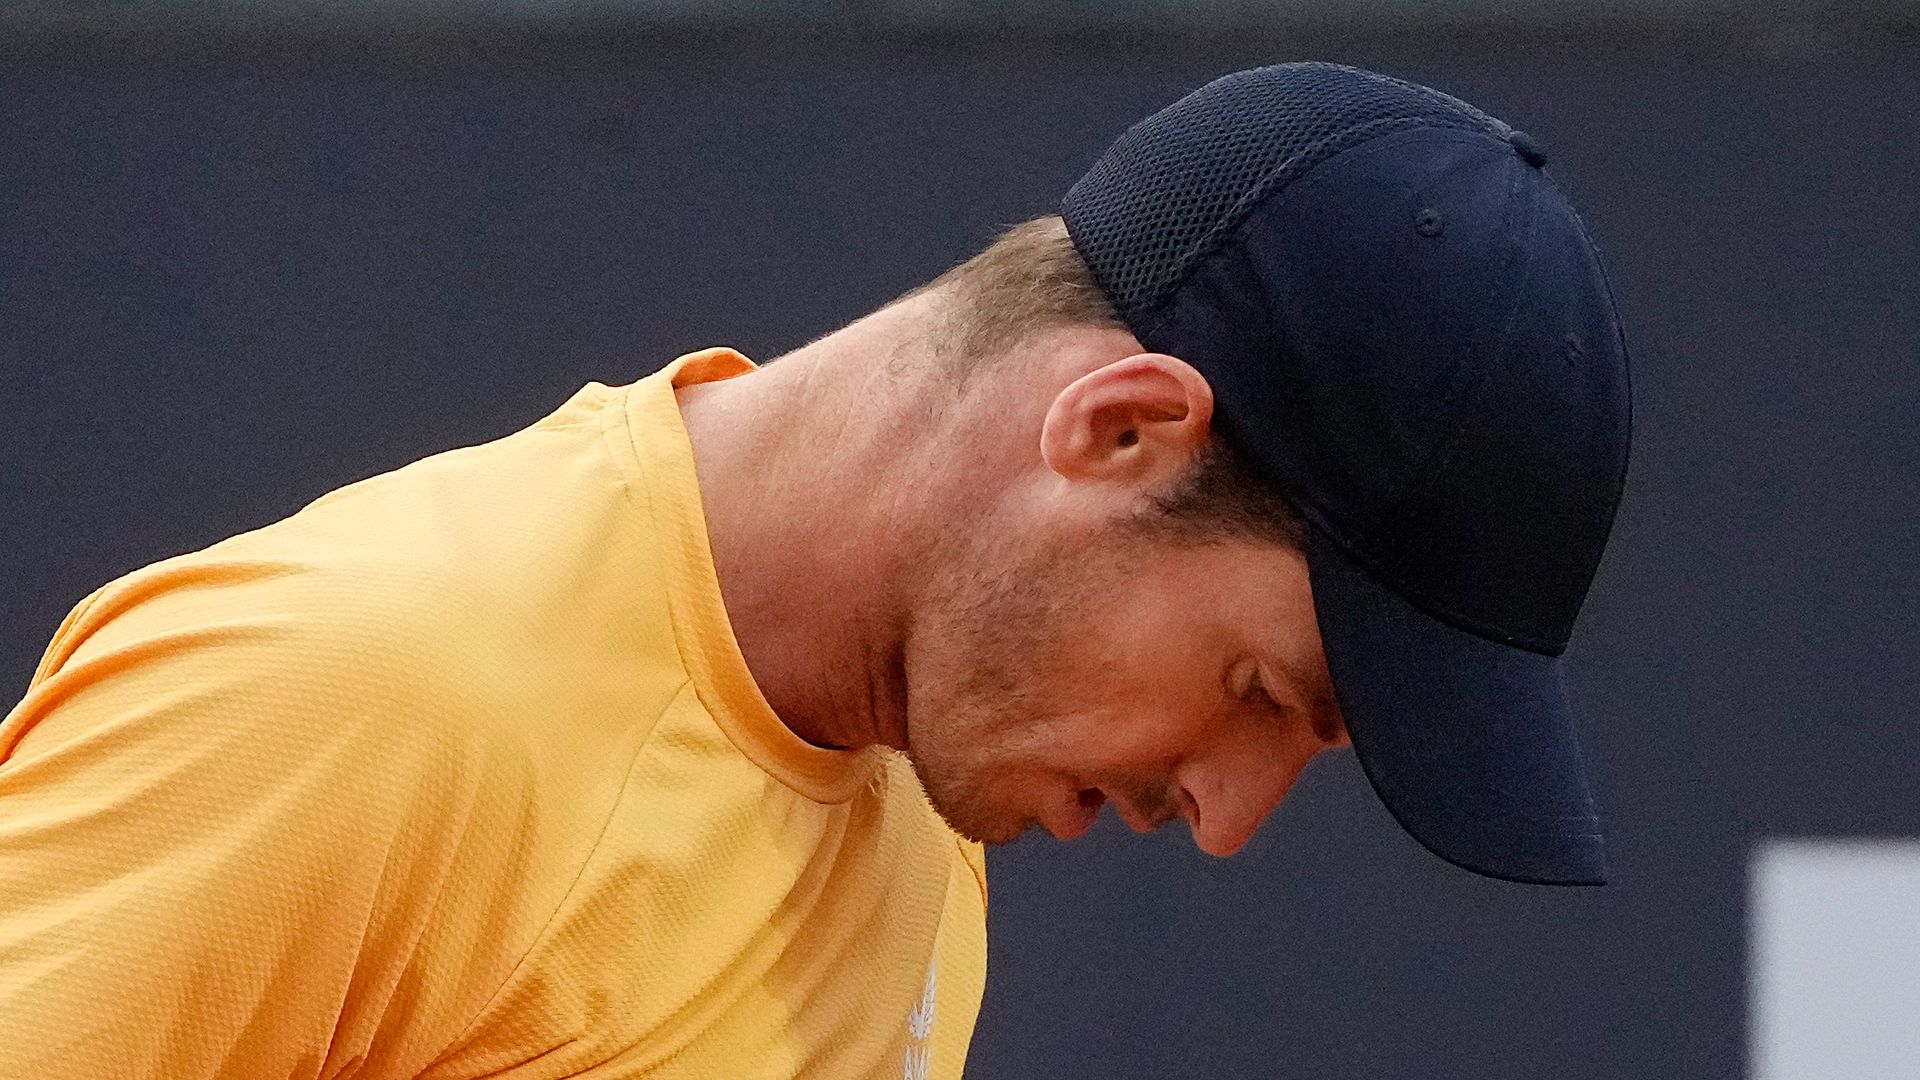 Murray’s first-round defeat to Fognini sees him out of Italian Open